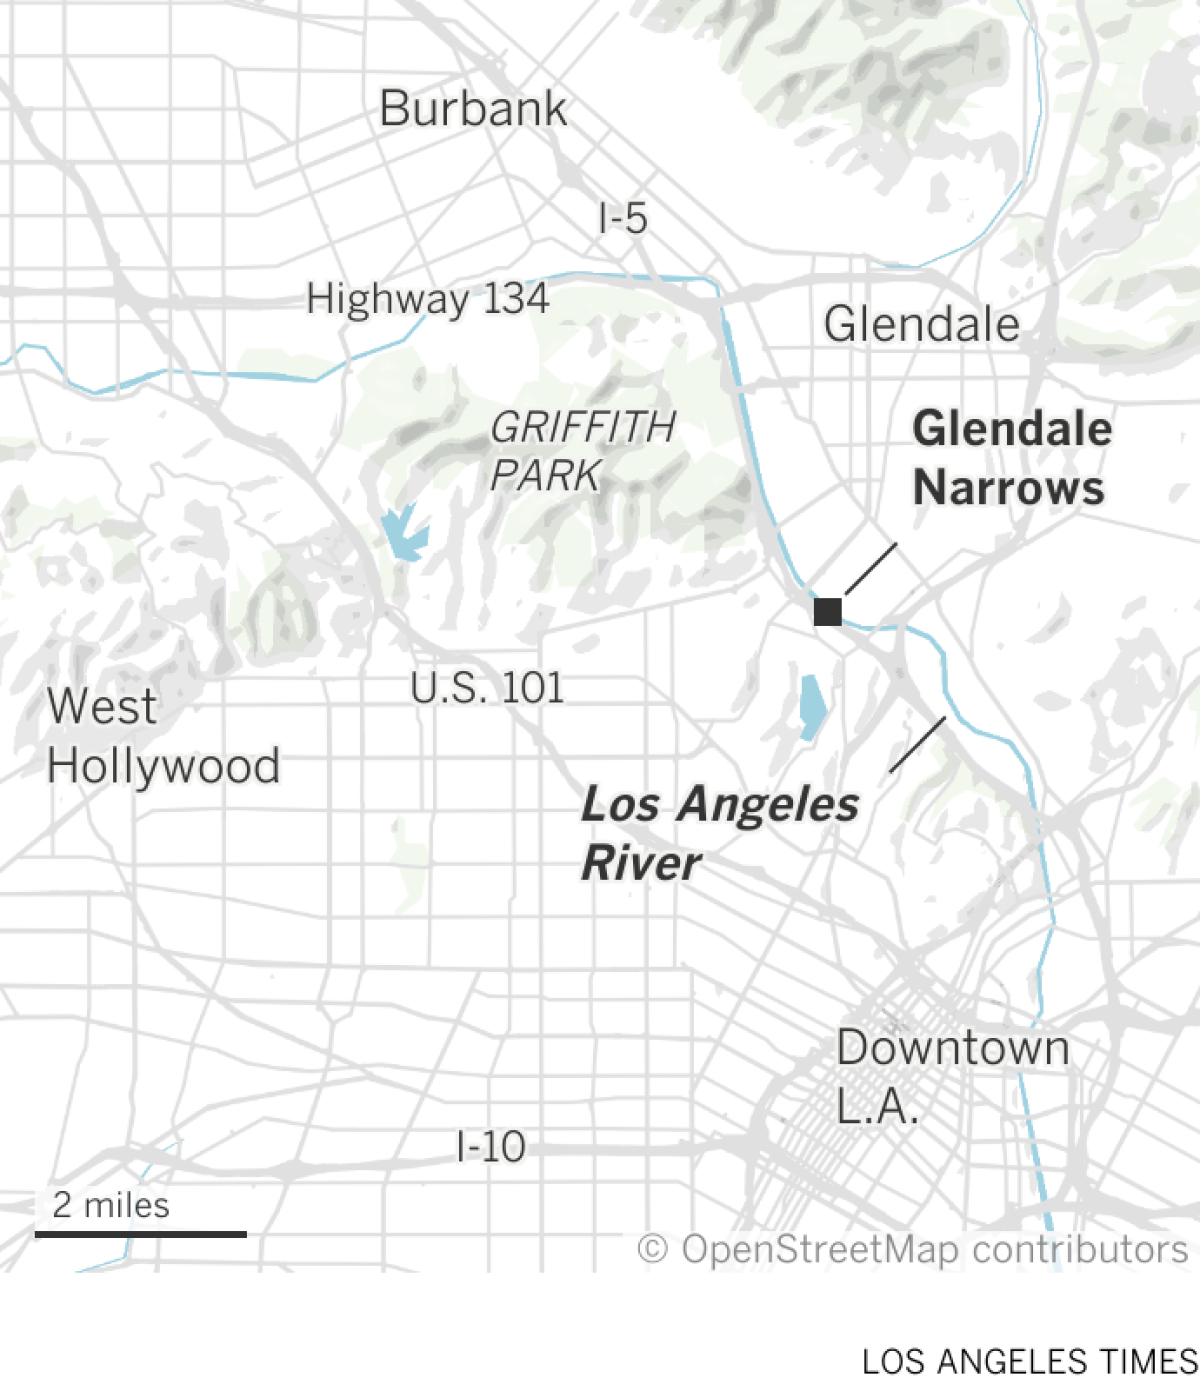 Locator map of the Glendale Narrows on the L.A. River.